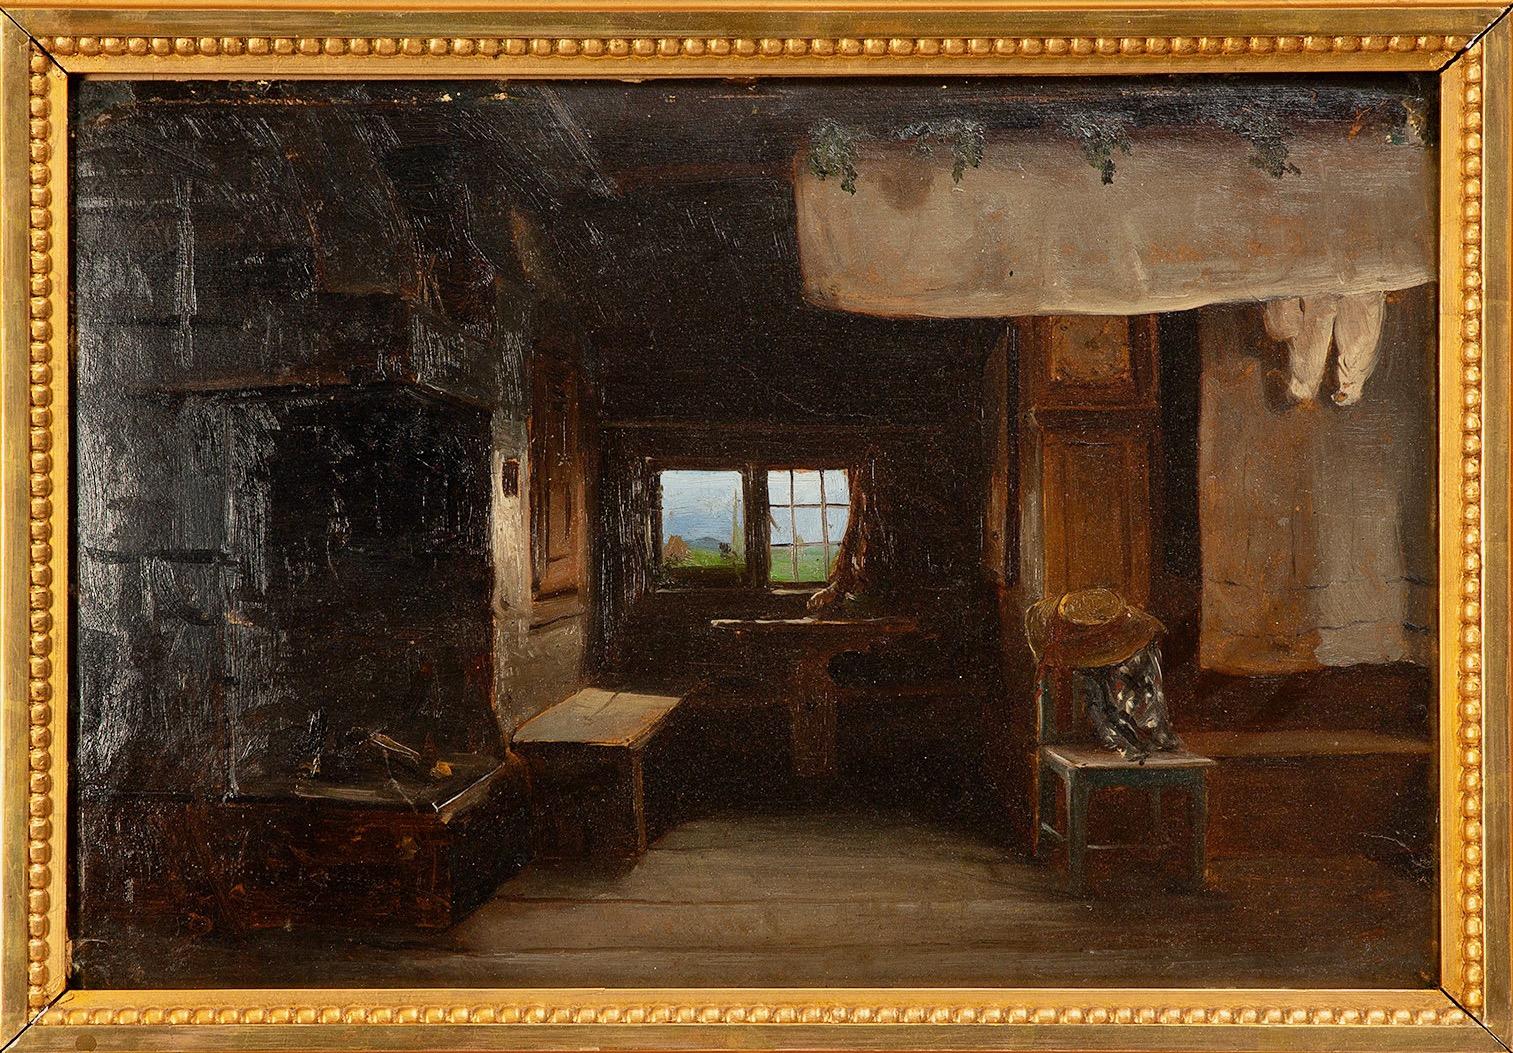 An interior oil study painted on cardboard by Bengt Nordenberg. (1822-1902) Not signed. It was sold from his estate. Size is without frame.

Bengt Nordenberg 1822 – 1902) was a Swedish artist. He belonged to the Düsseldorf school of painting and